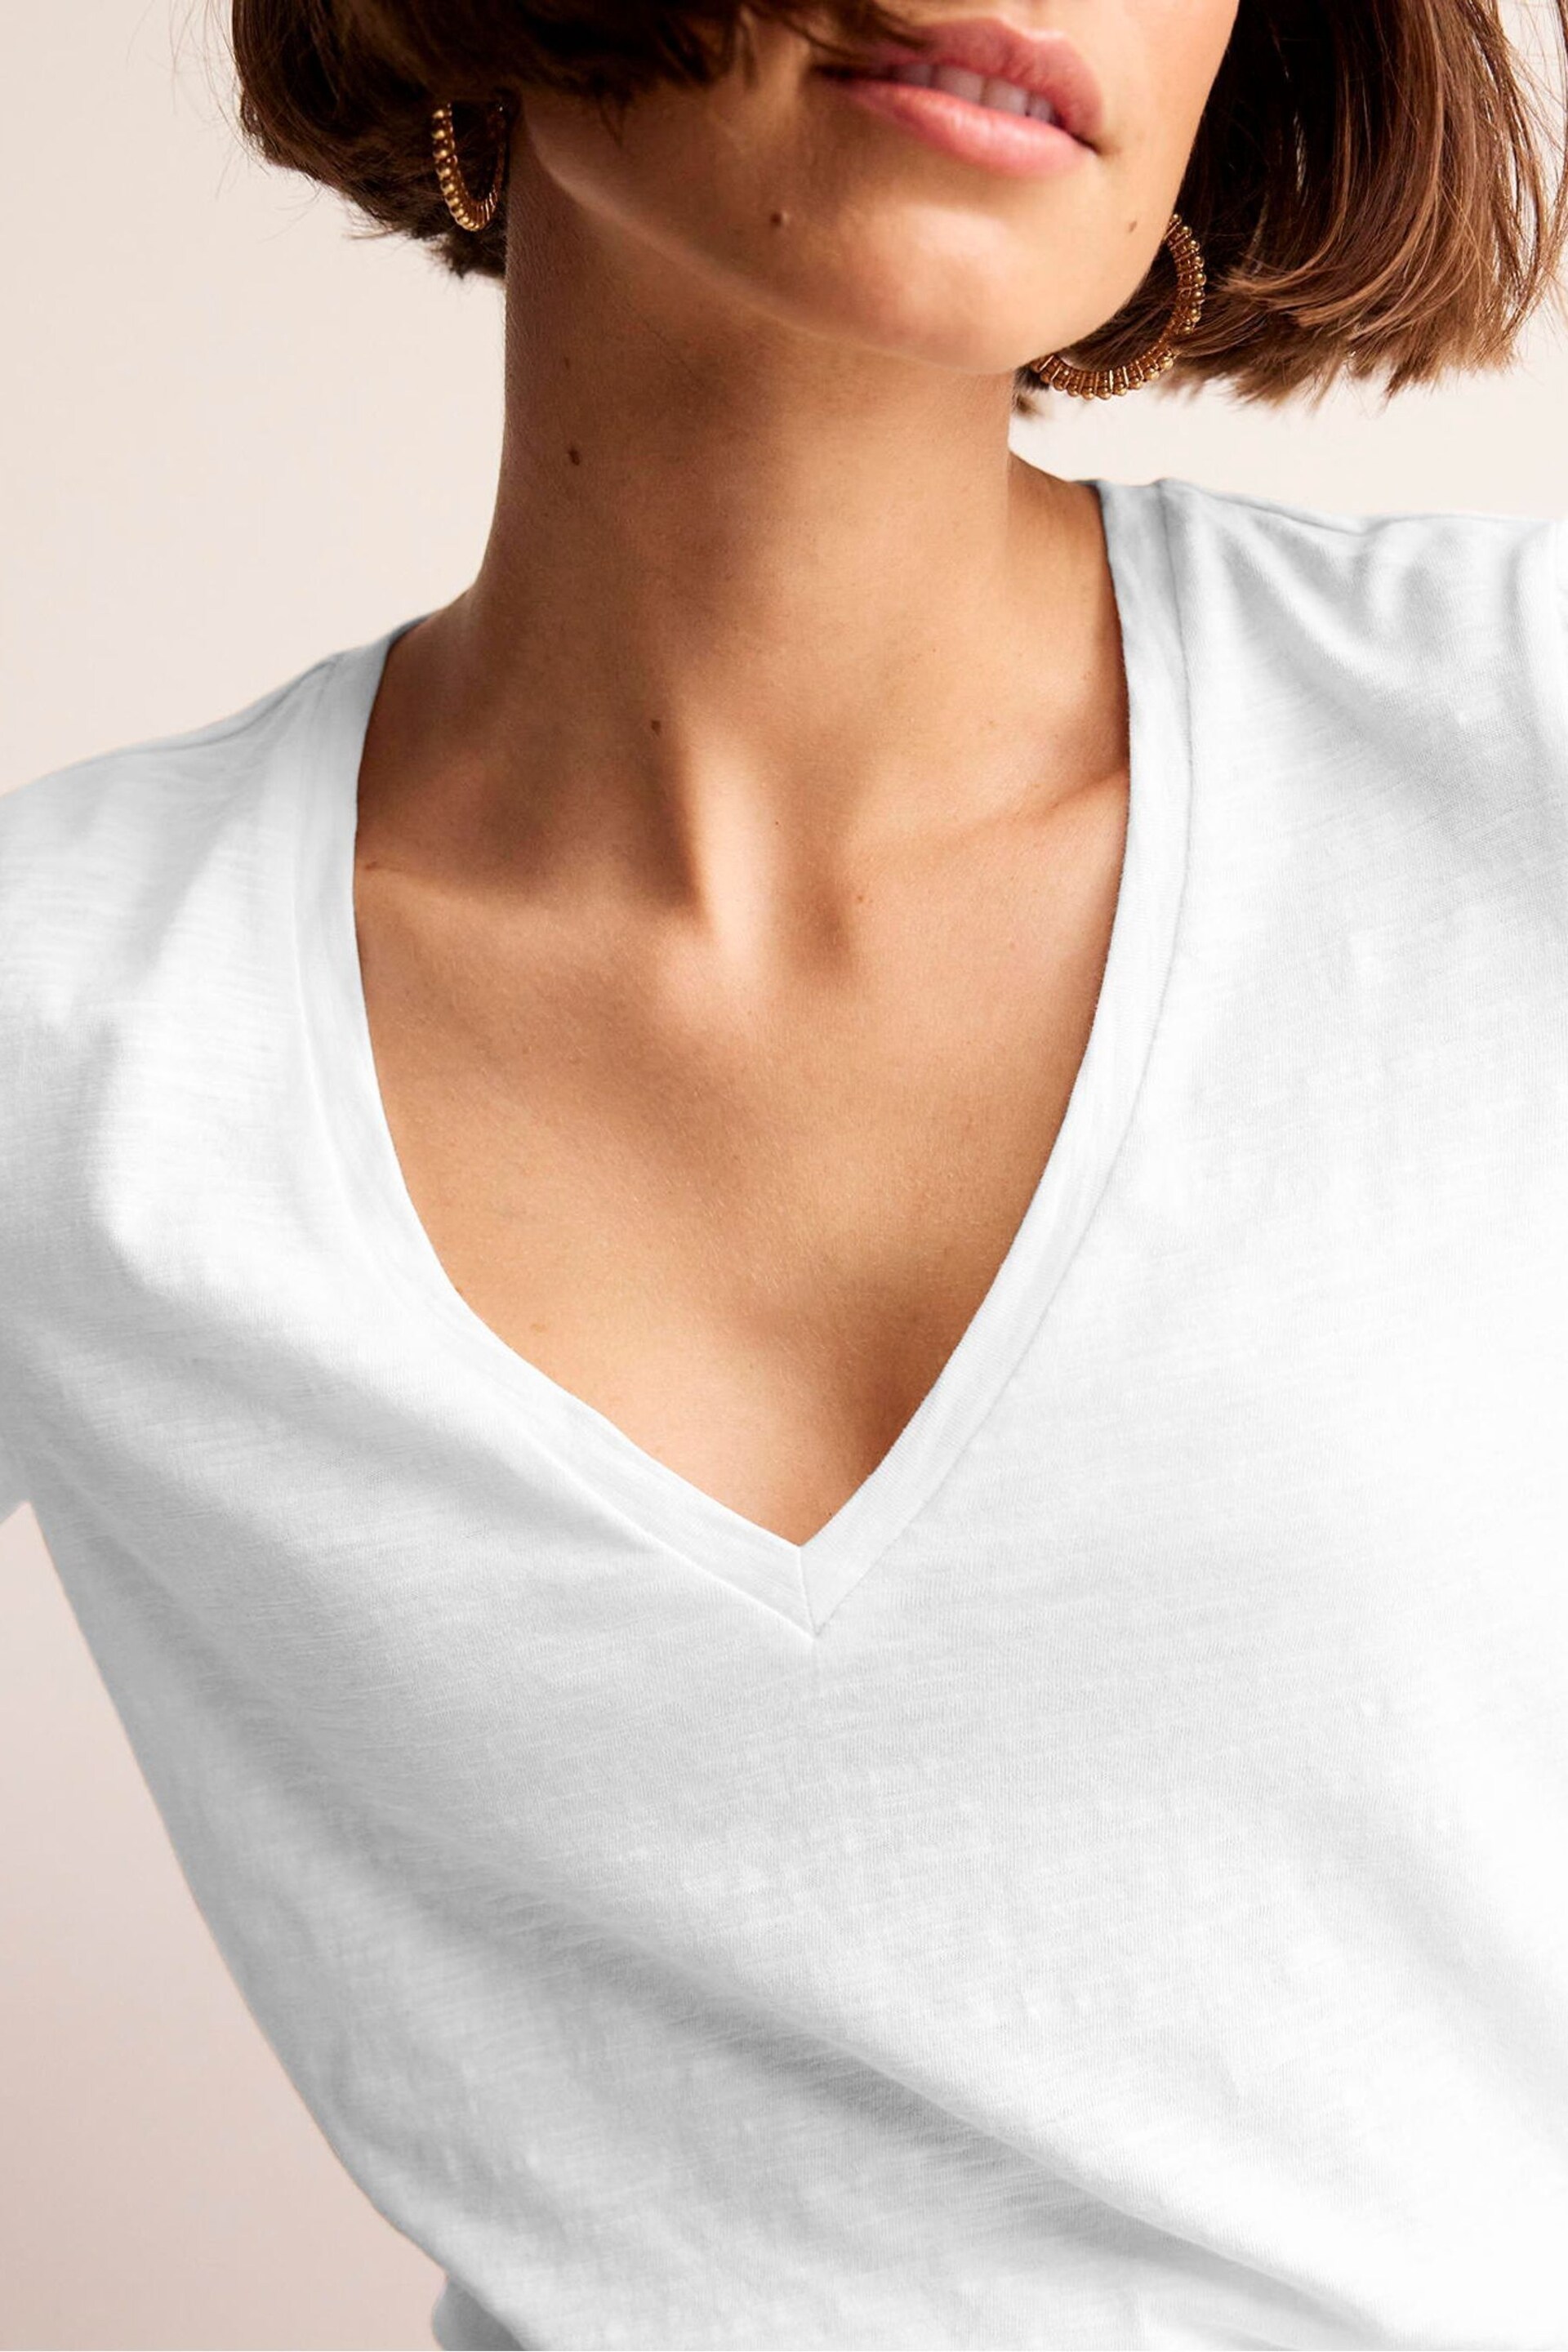 Boden White Cotton V-Neck Long Sleeve Top - Image 4 of 5